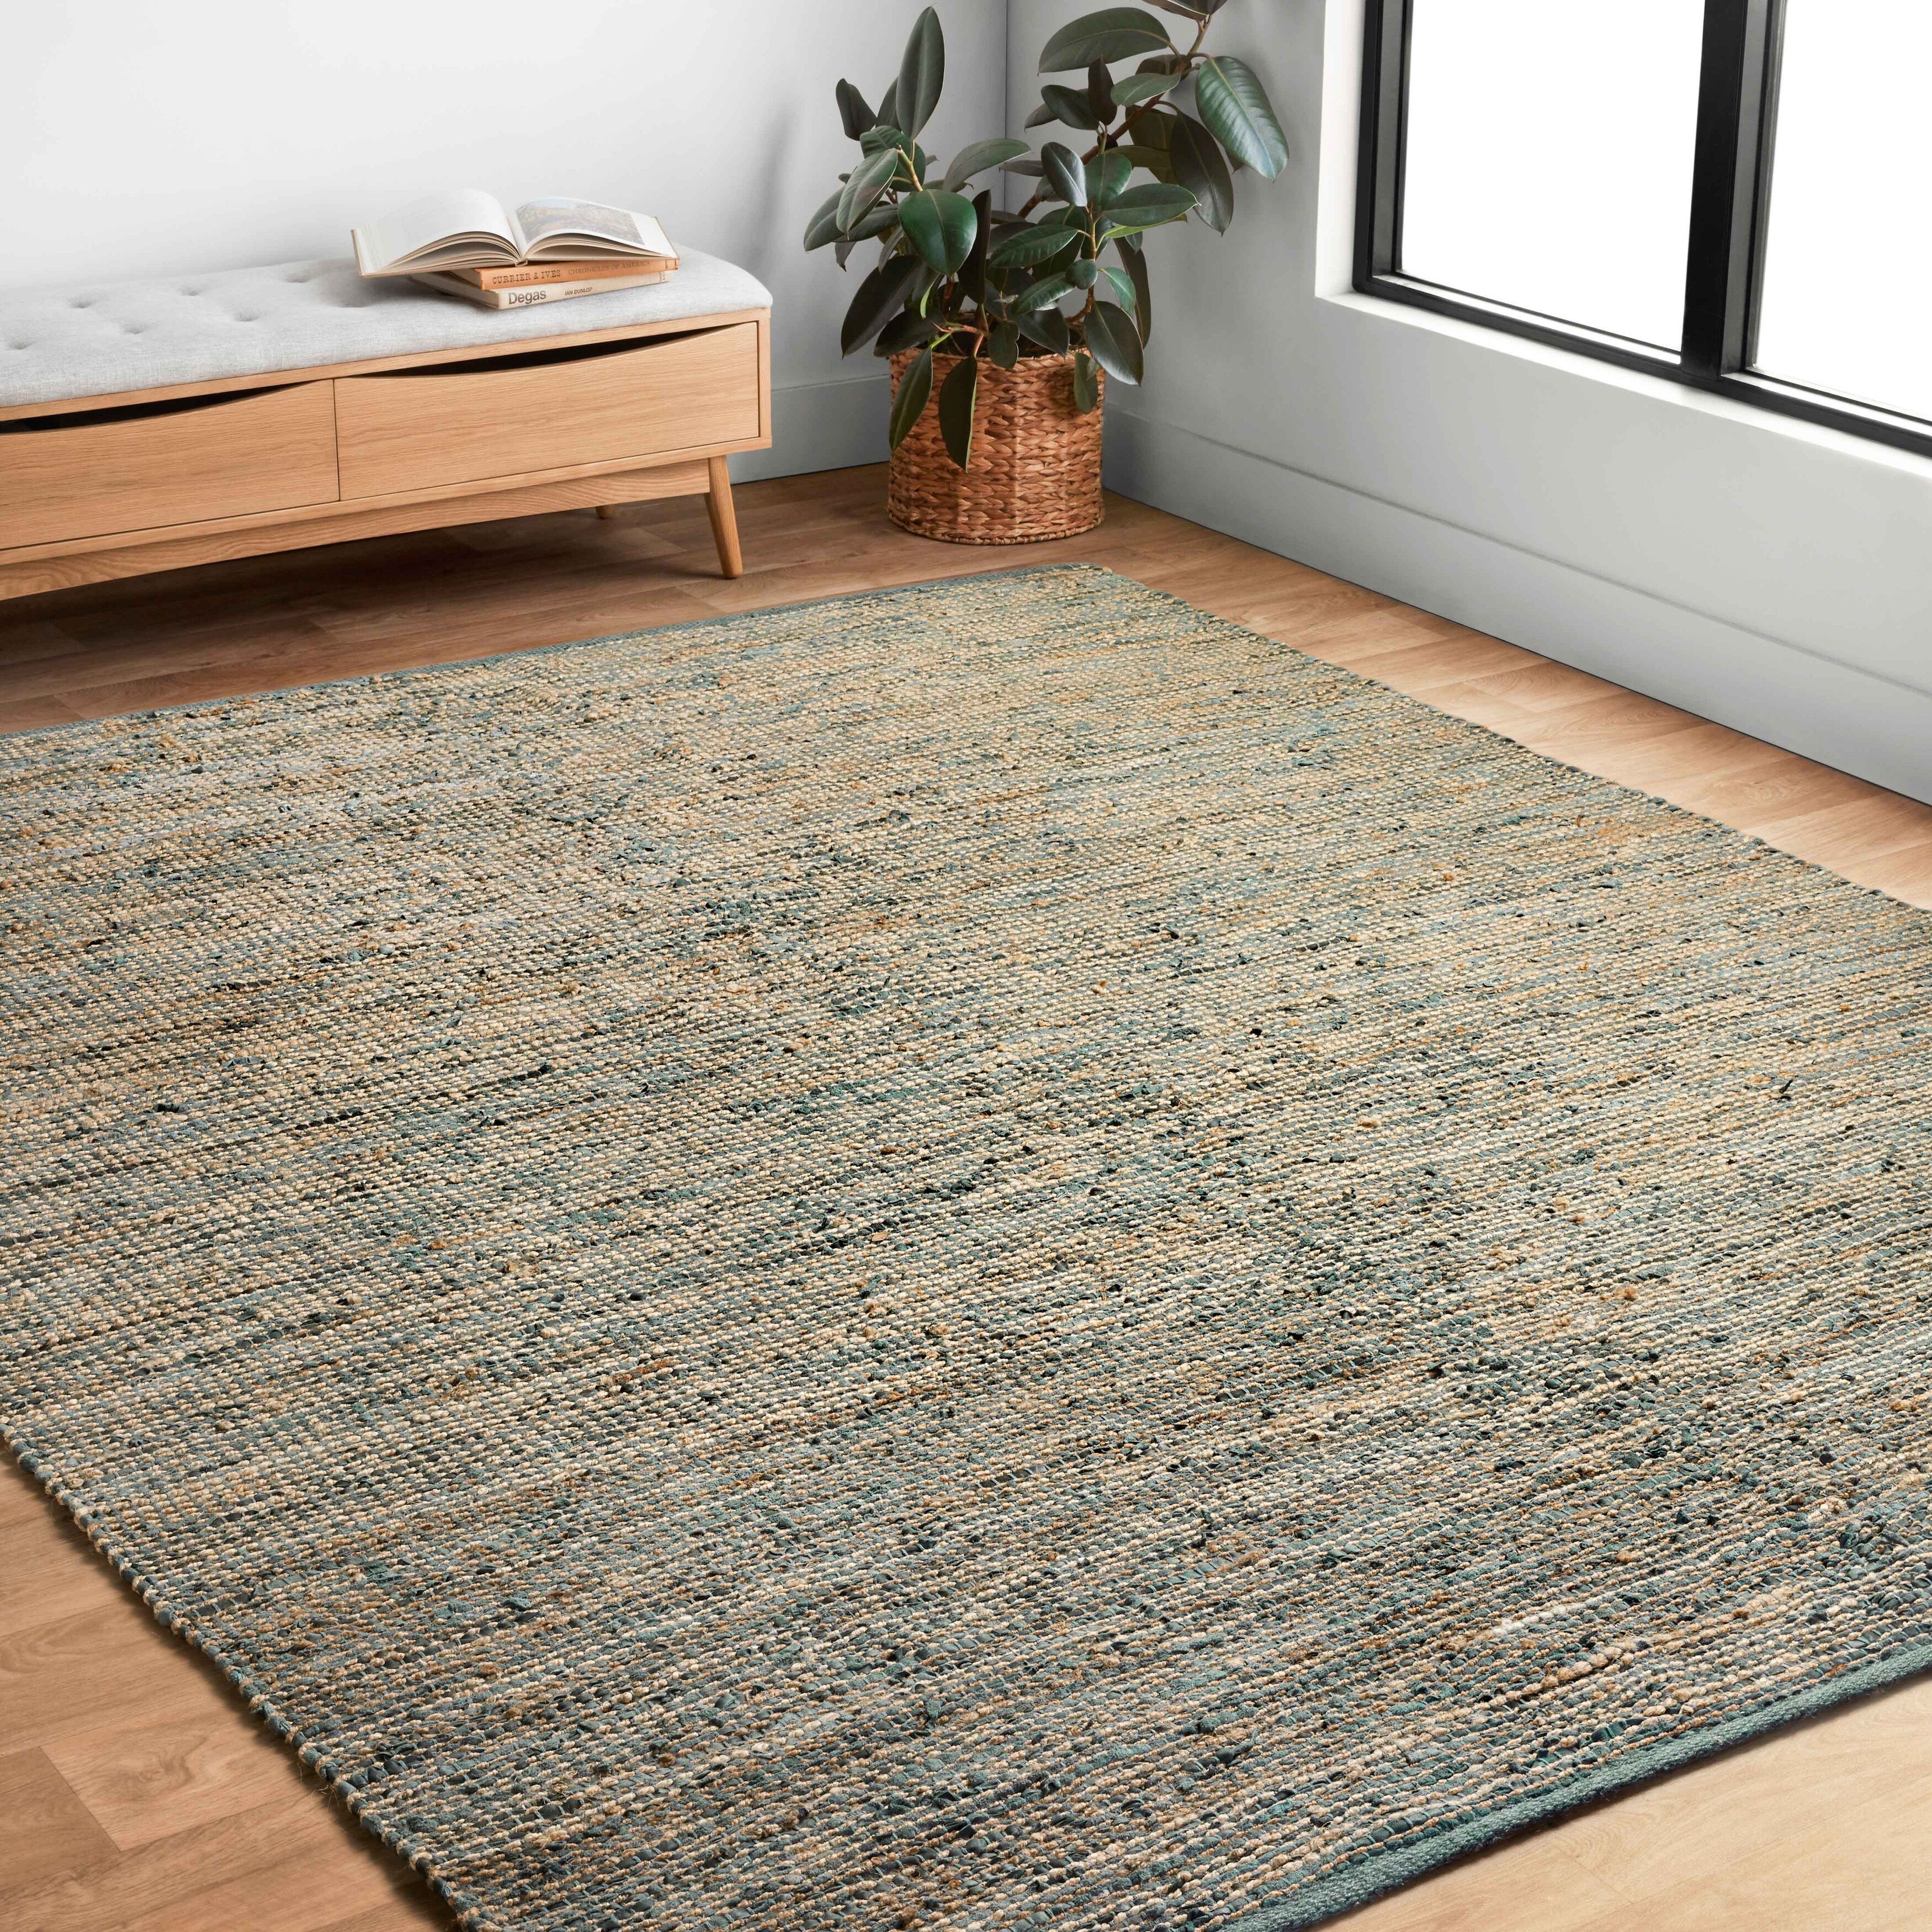 show original title Details about   Rug Jute & Cotton Handmade Woven Style Reversible rustic look 